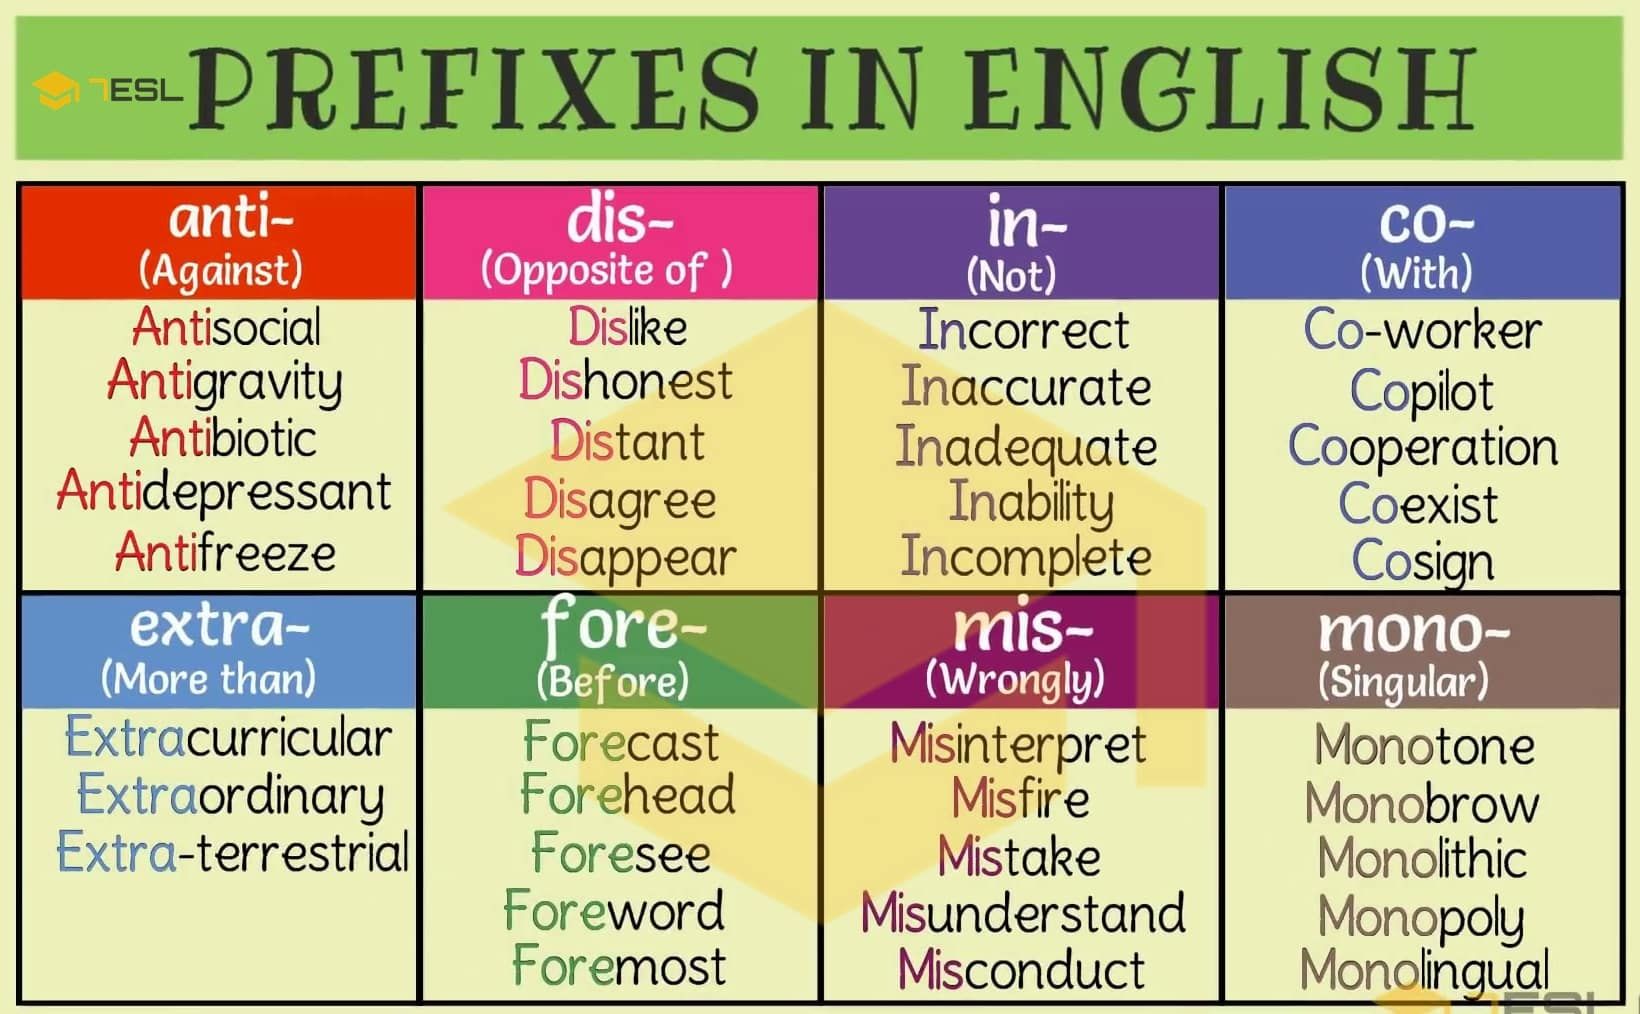 Suffixes and prefixes in English. Prefixes в английском языке. Приставки в английском языке таблица. Prefixes in English таблица. Prefixes of adjectives